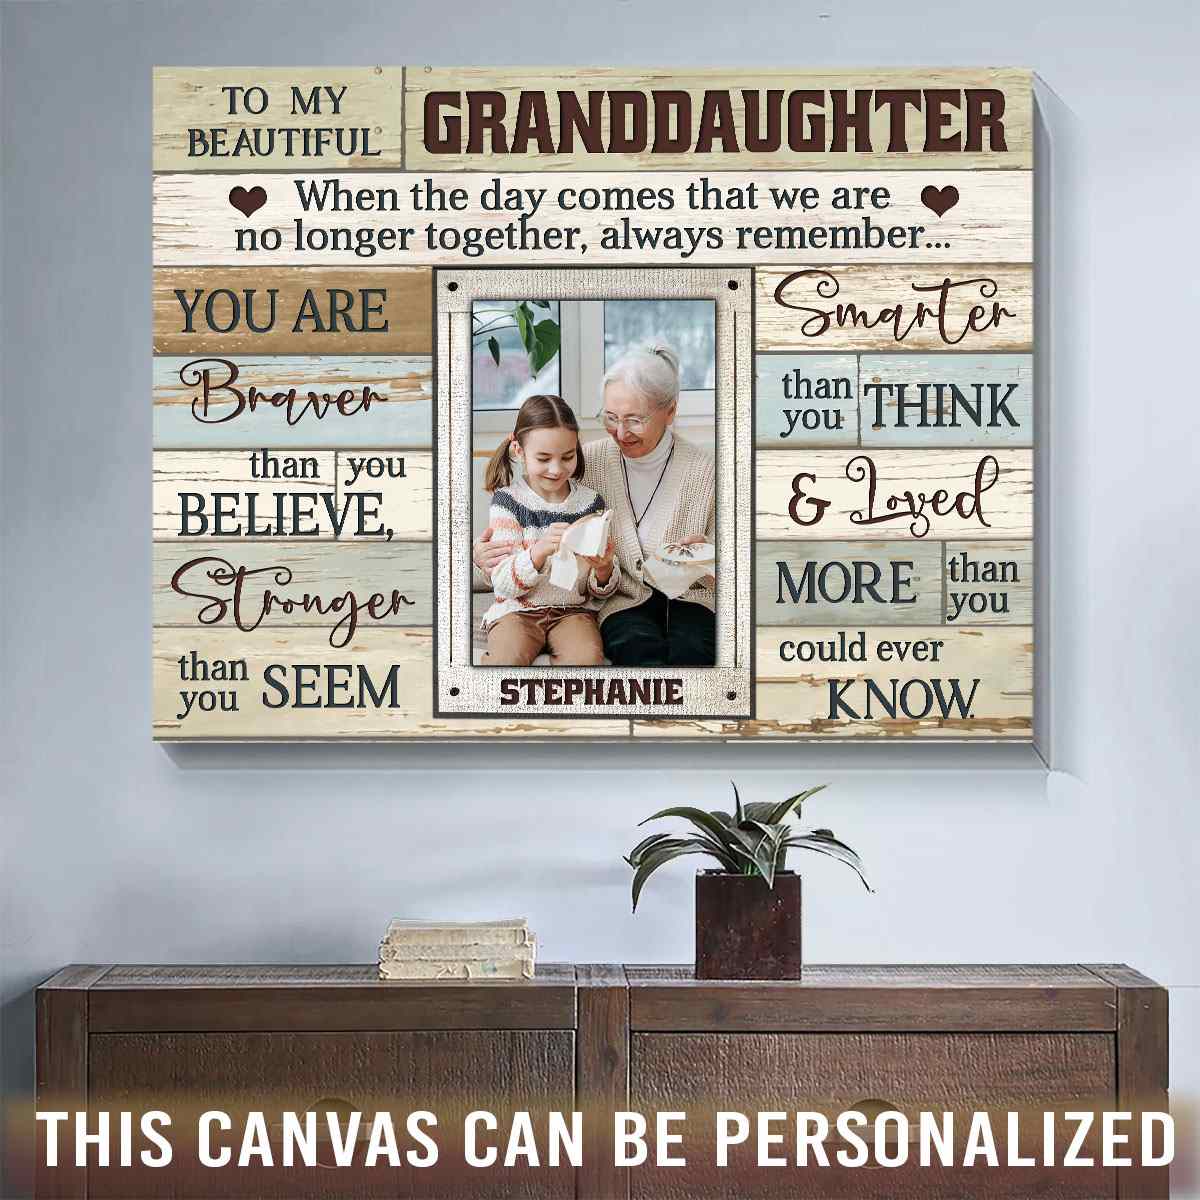 https://images.ohcanvas.com/ohcanvas_com/2022/06/17025534/custom-canvas-gift-for-granddaughter-from-grandma-personalized-granddaughter-gifts.jpg